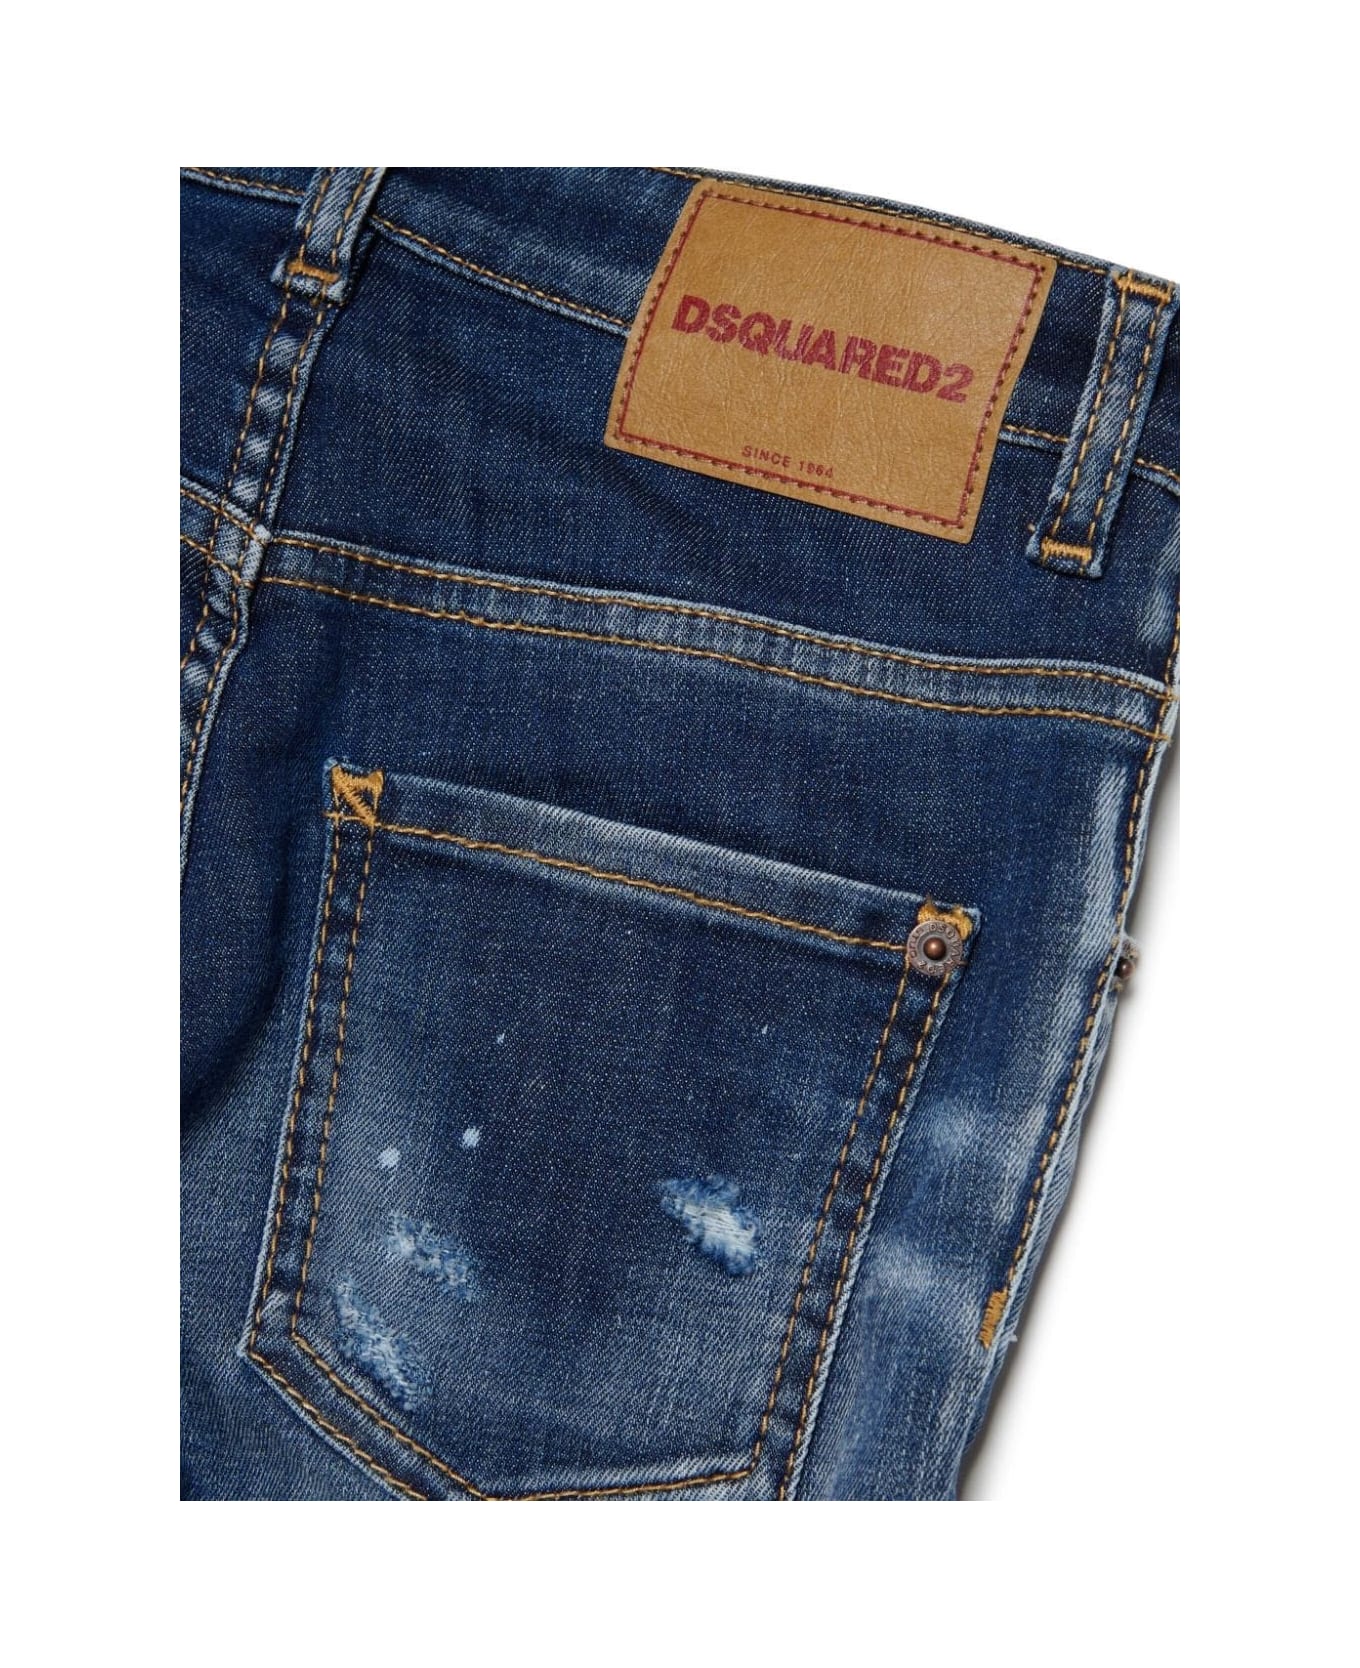 Dsquared2 Skater Skinny Jeans In Dark Blue Washed With Rips - Blue ボトムス